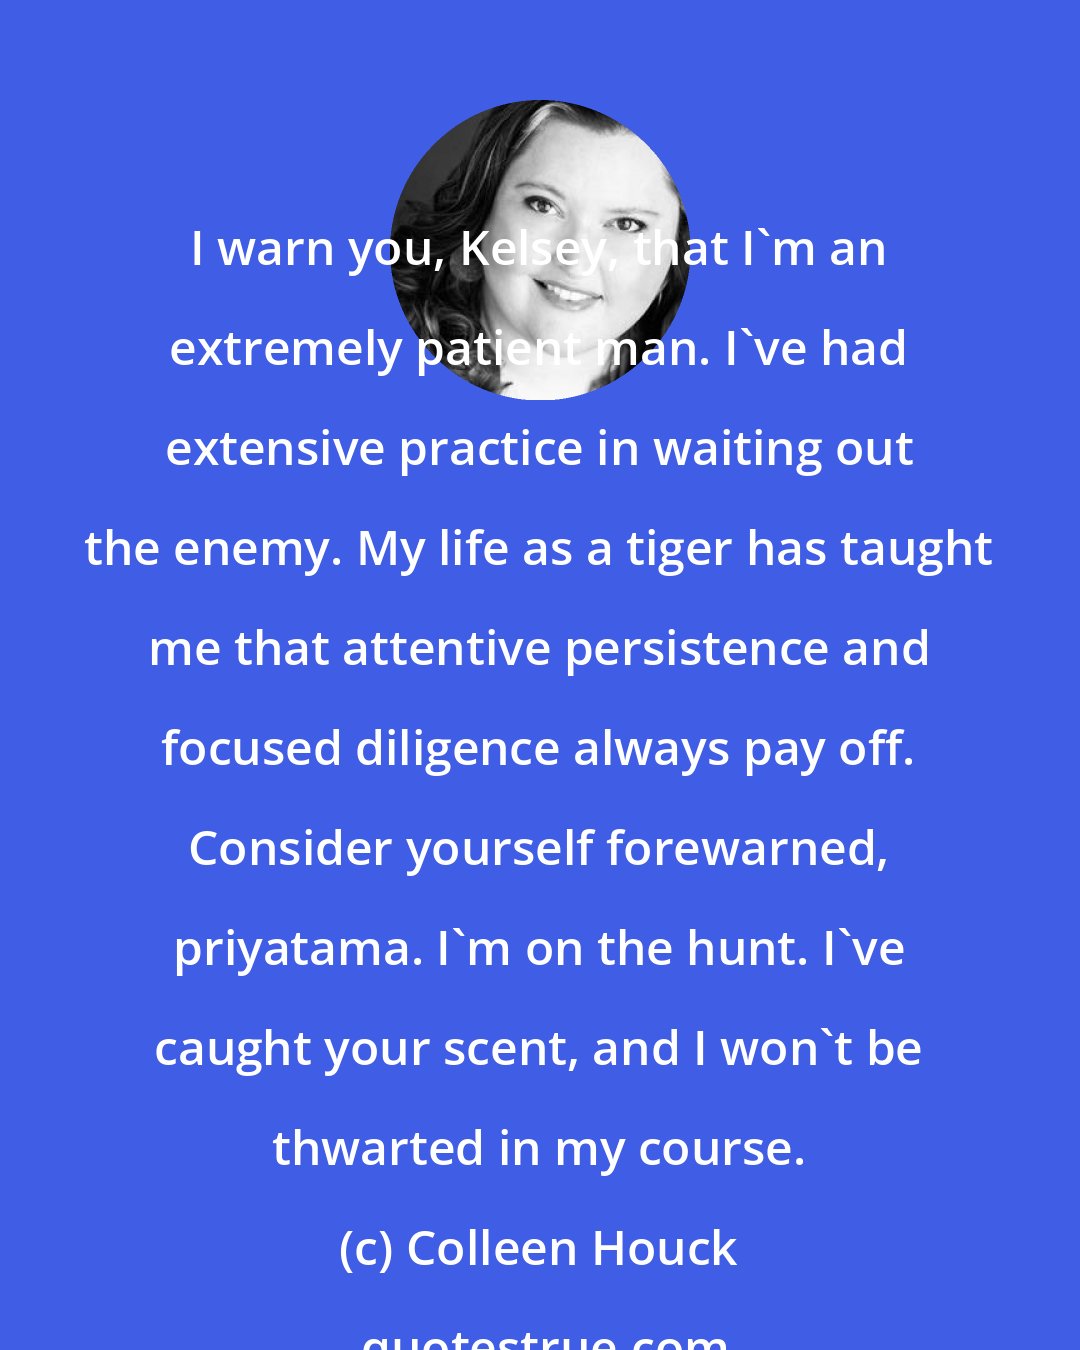 Colleen Houck: I warn you, Kelsey, that I'm an extremely patient man. I've had extensive practice in waiting out the enemy. My life as a tiger has taught me that attentive persistence and focused diligence always pay off. Consider yourself forewarned, priyatama. I'm on the hunt. I've caught your scent, and I won't be thwarted in my course.